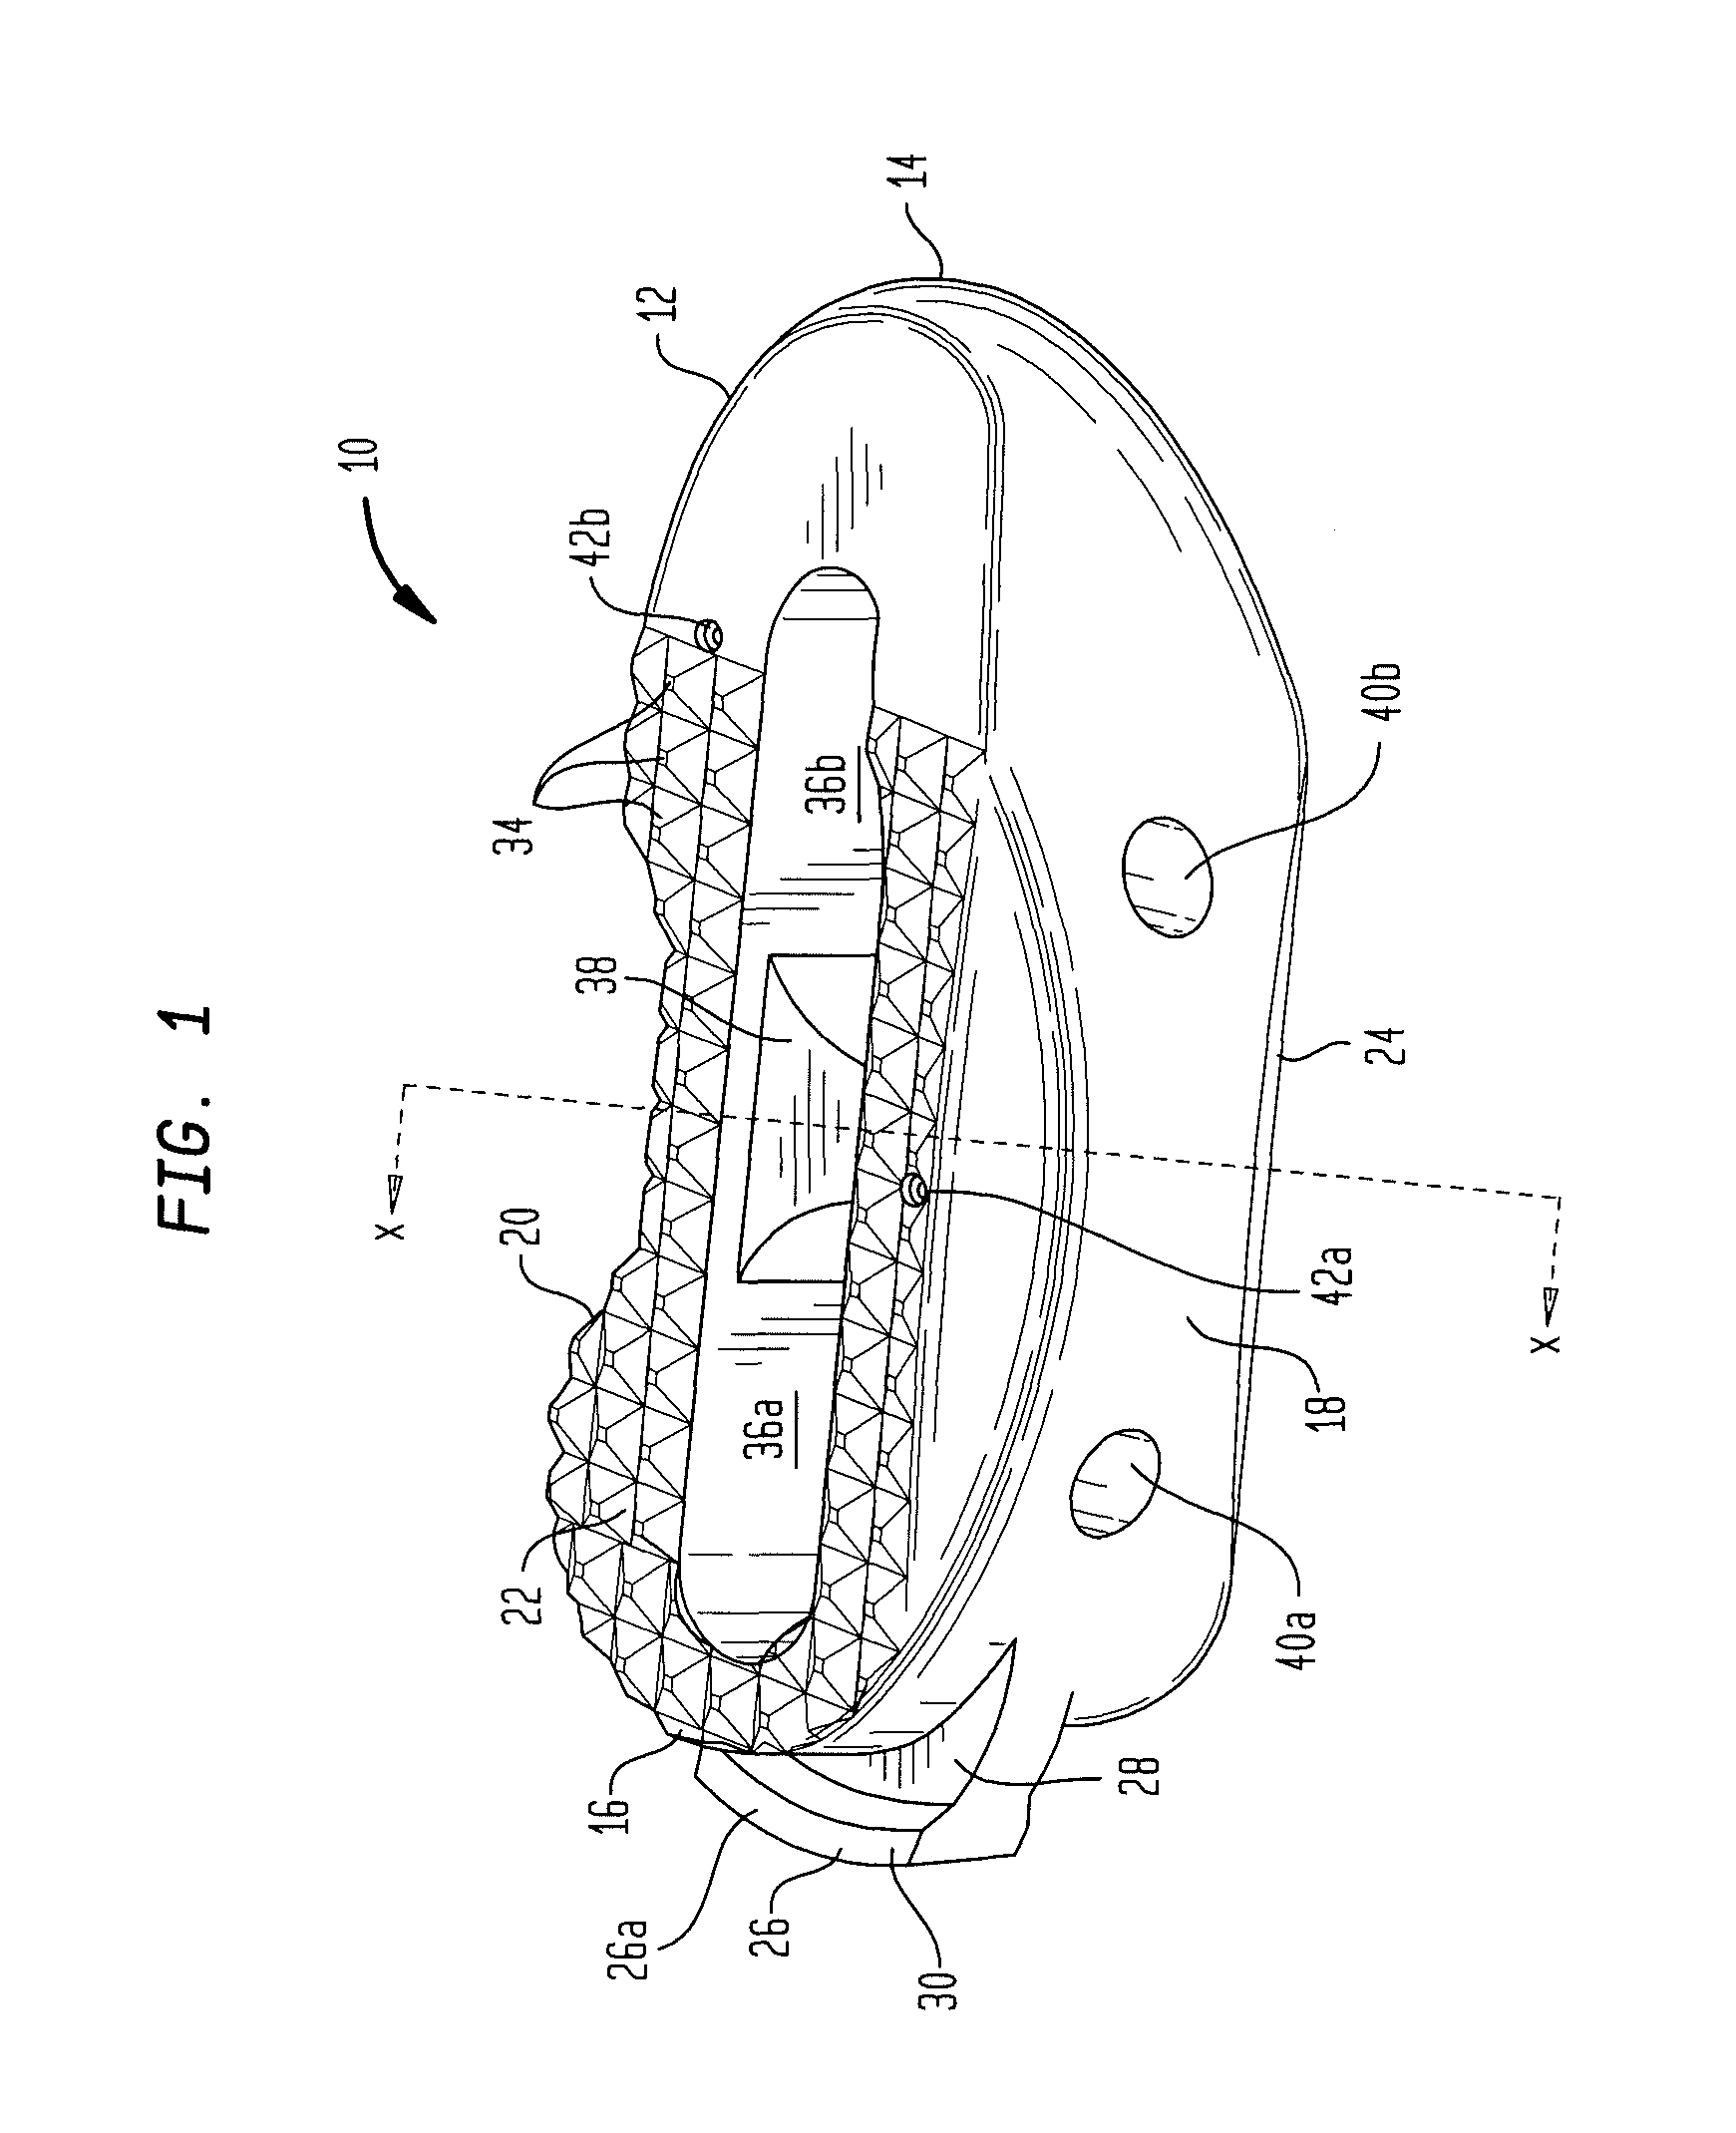 Method of inserting surgical implant with guiding rail